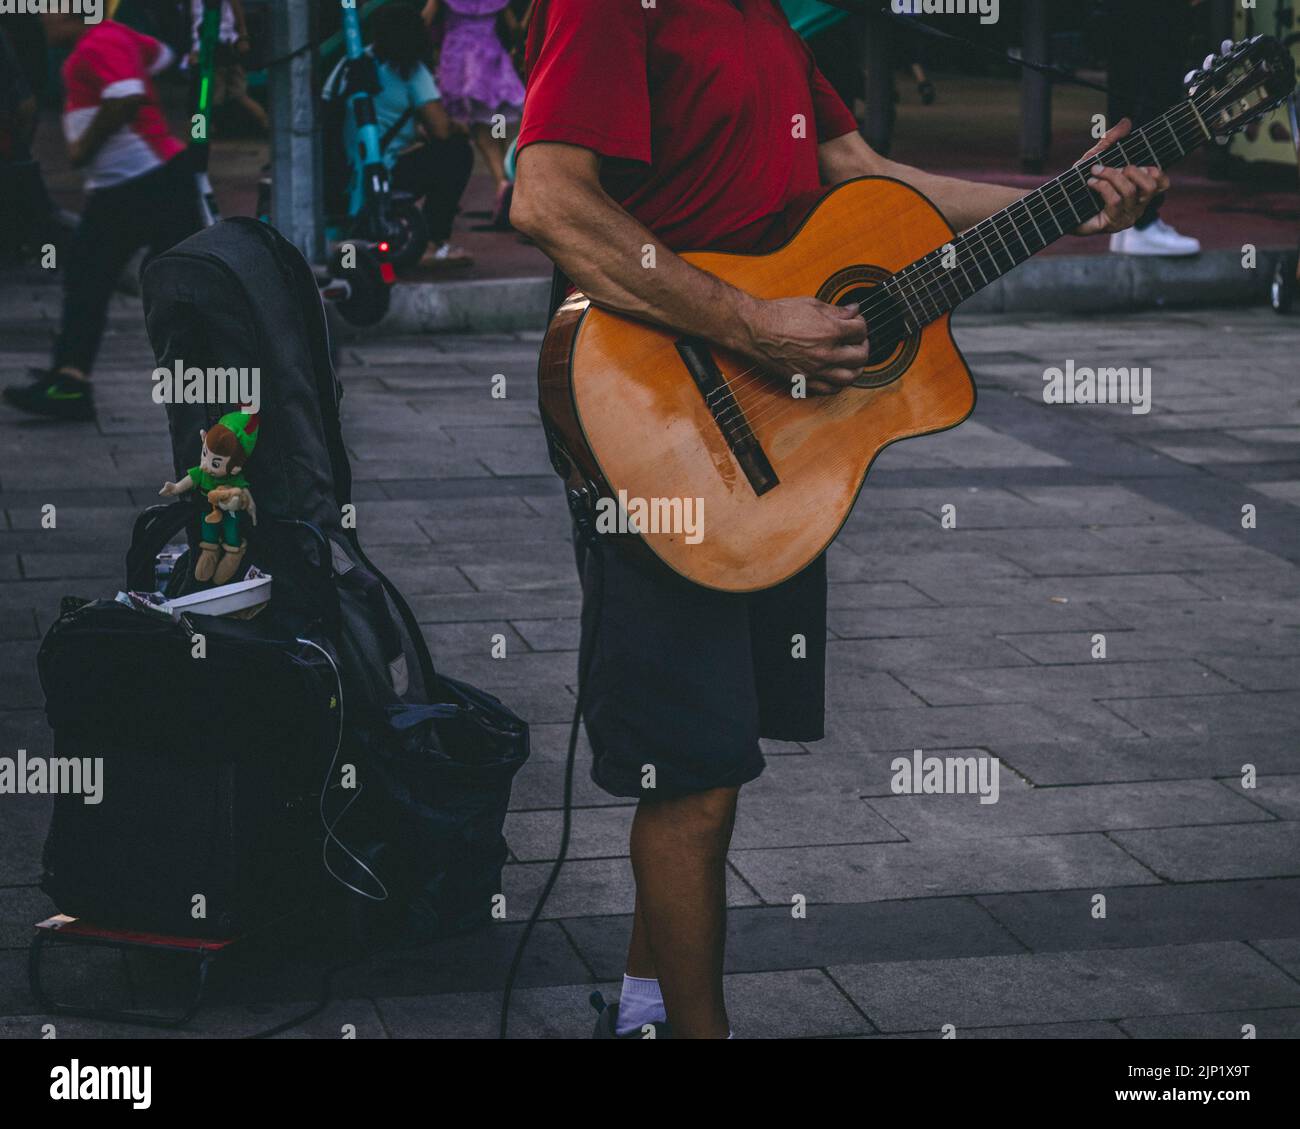 person playing guitar Stock Photo